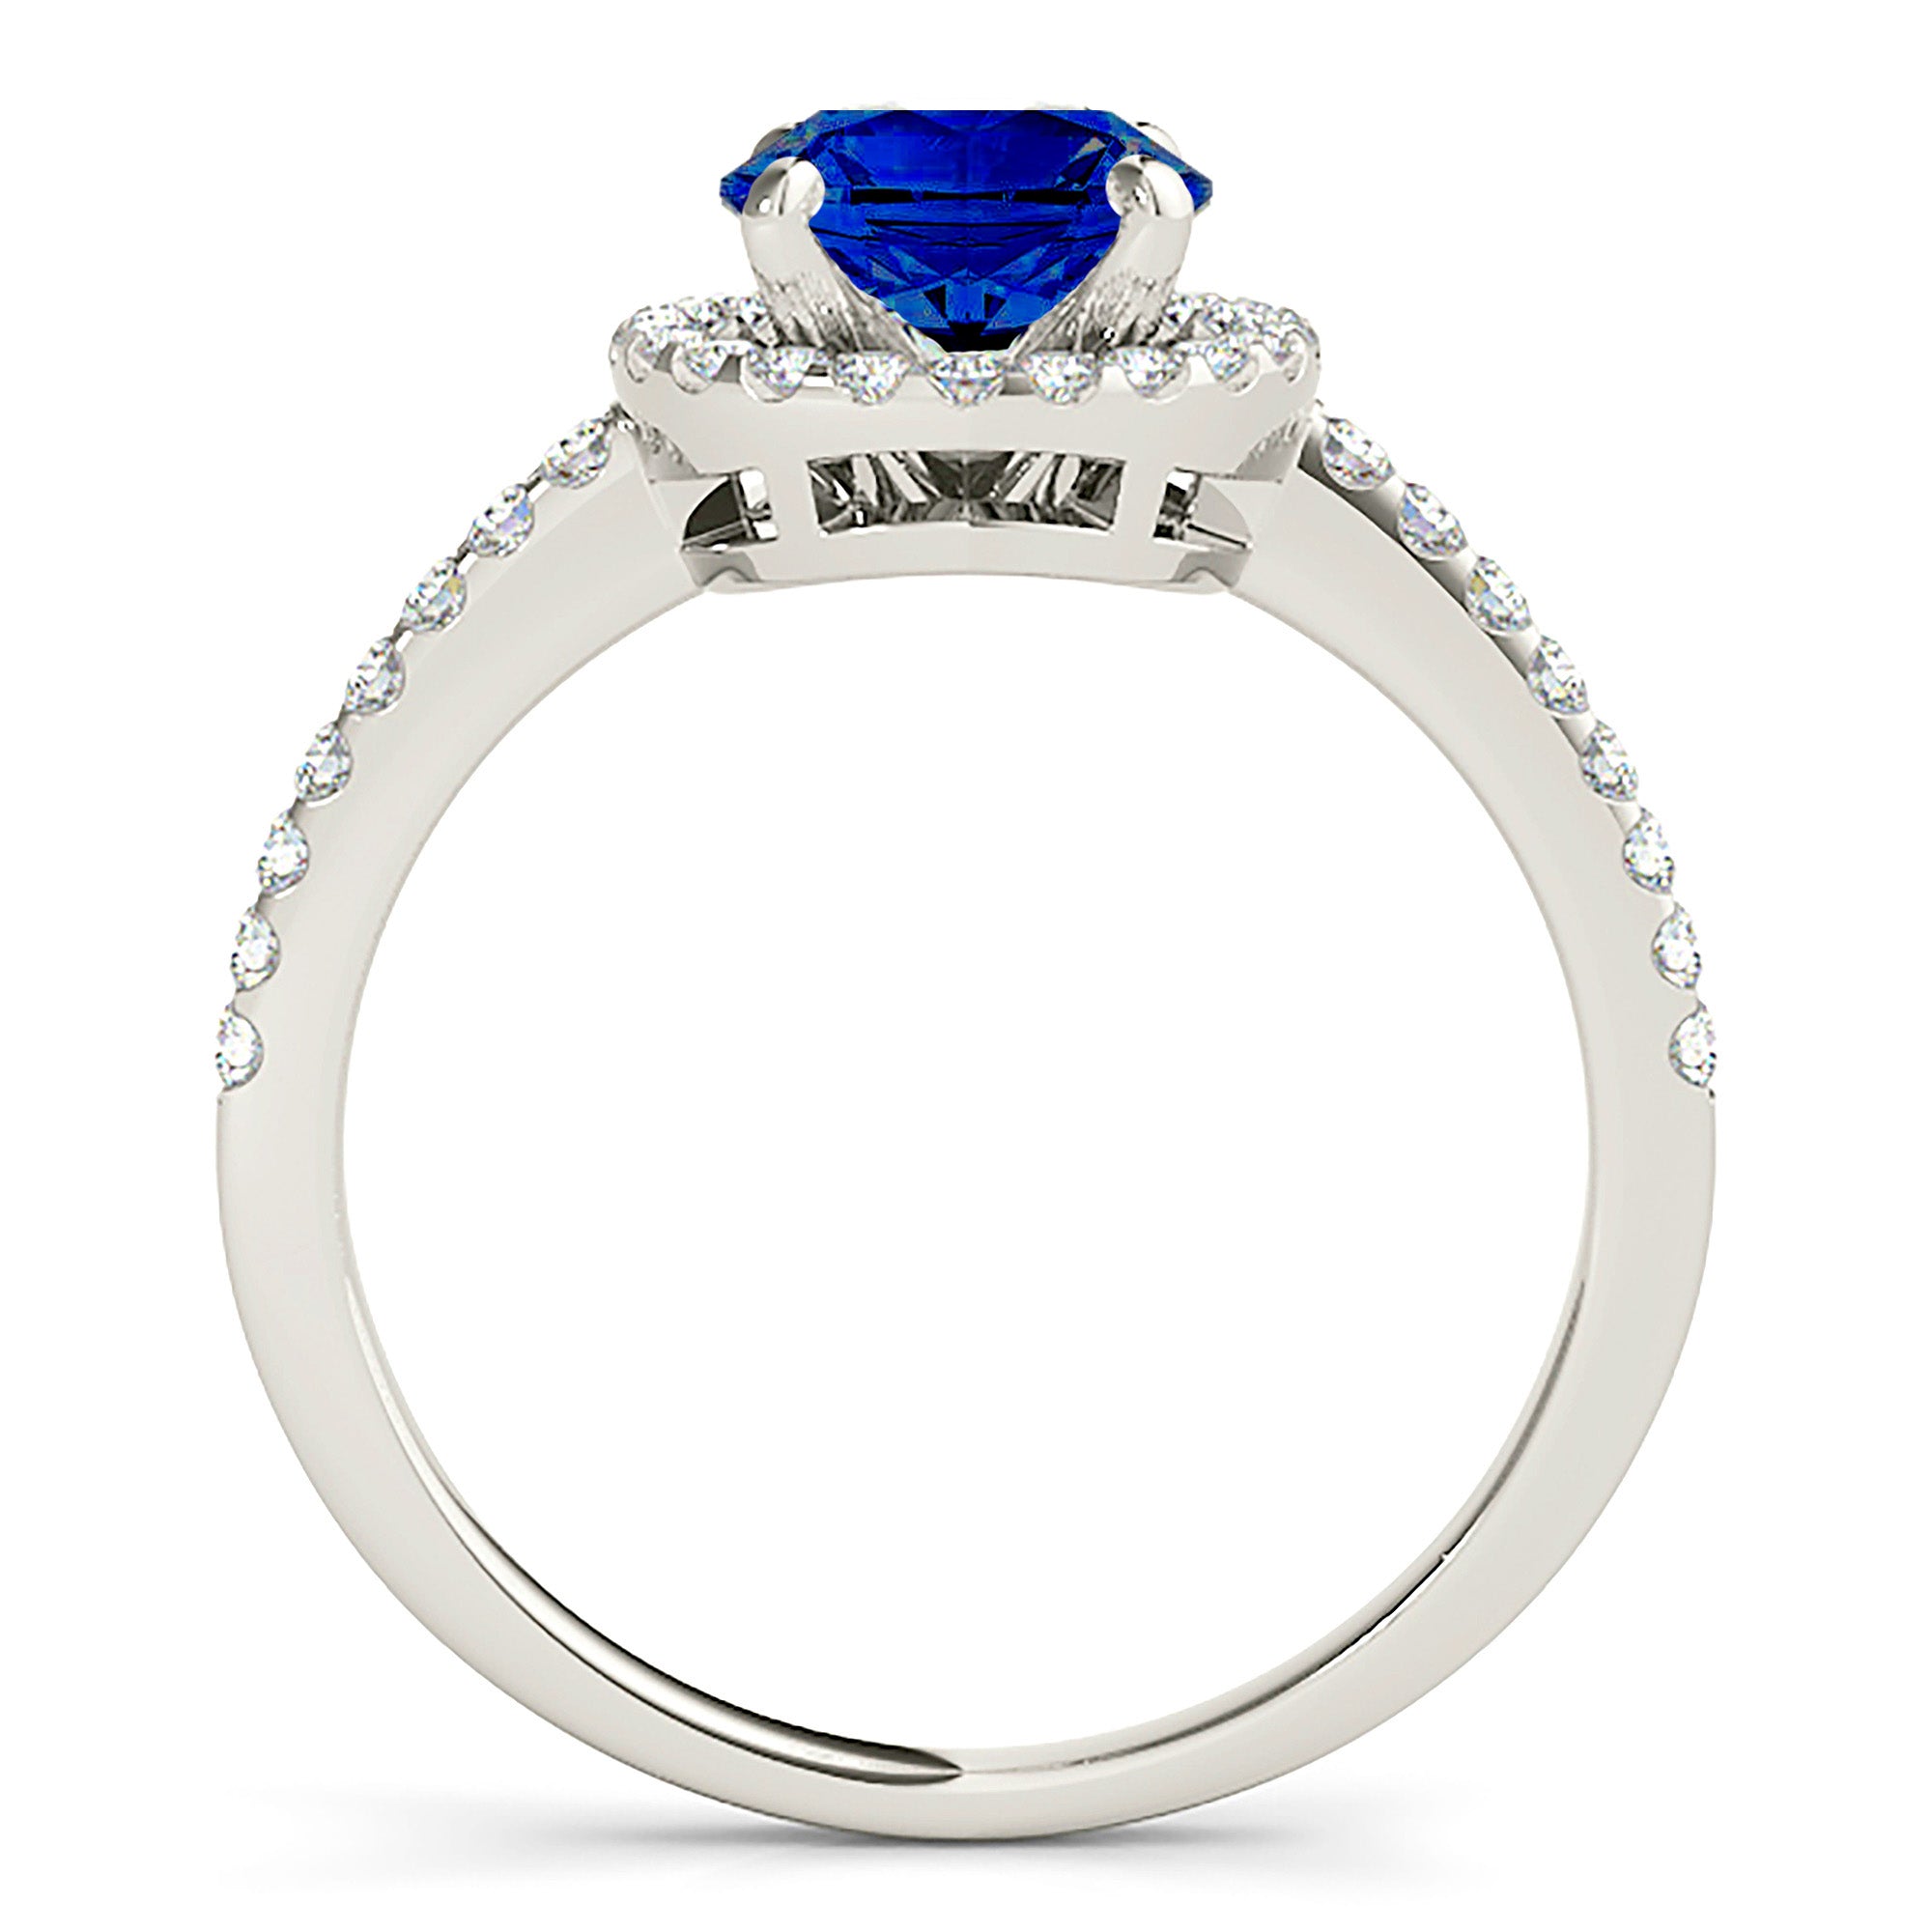 2.41 ct. Genuine Blue Sapphire Four Prong Halo Ring with 0.35 ctw. Side Diamonds-in 14K/18K White, Yellow, Rose Gold and Platinum - Christmas Jewelry Gift -VIRABYANI